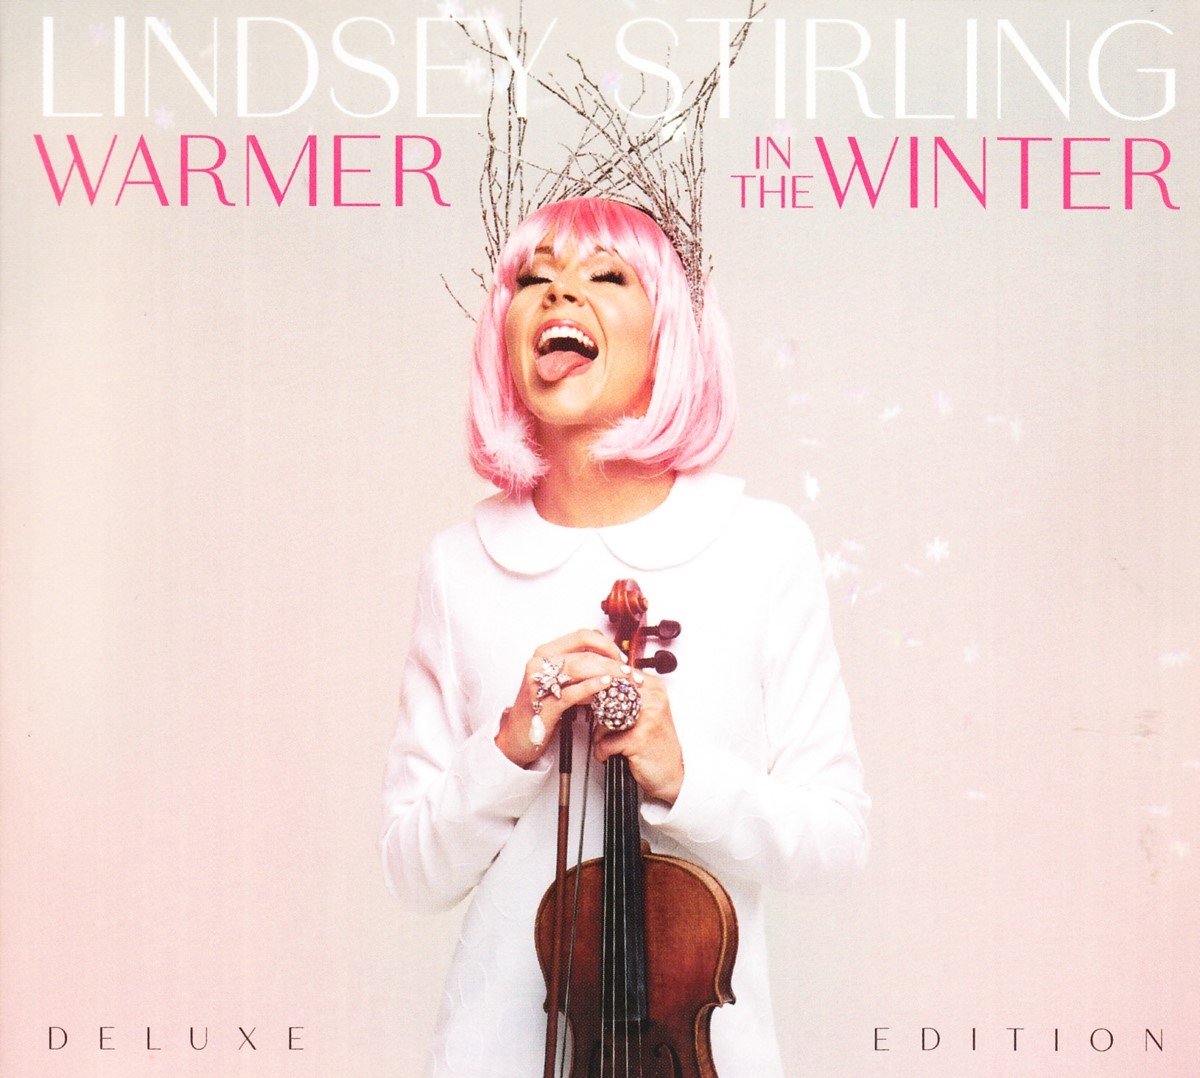 Lindsey Stirling - Warmer In The Winter (CD) (Deluxe Edition) - Lindsey Stirling